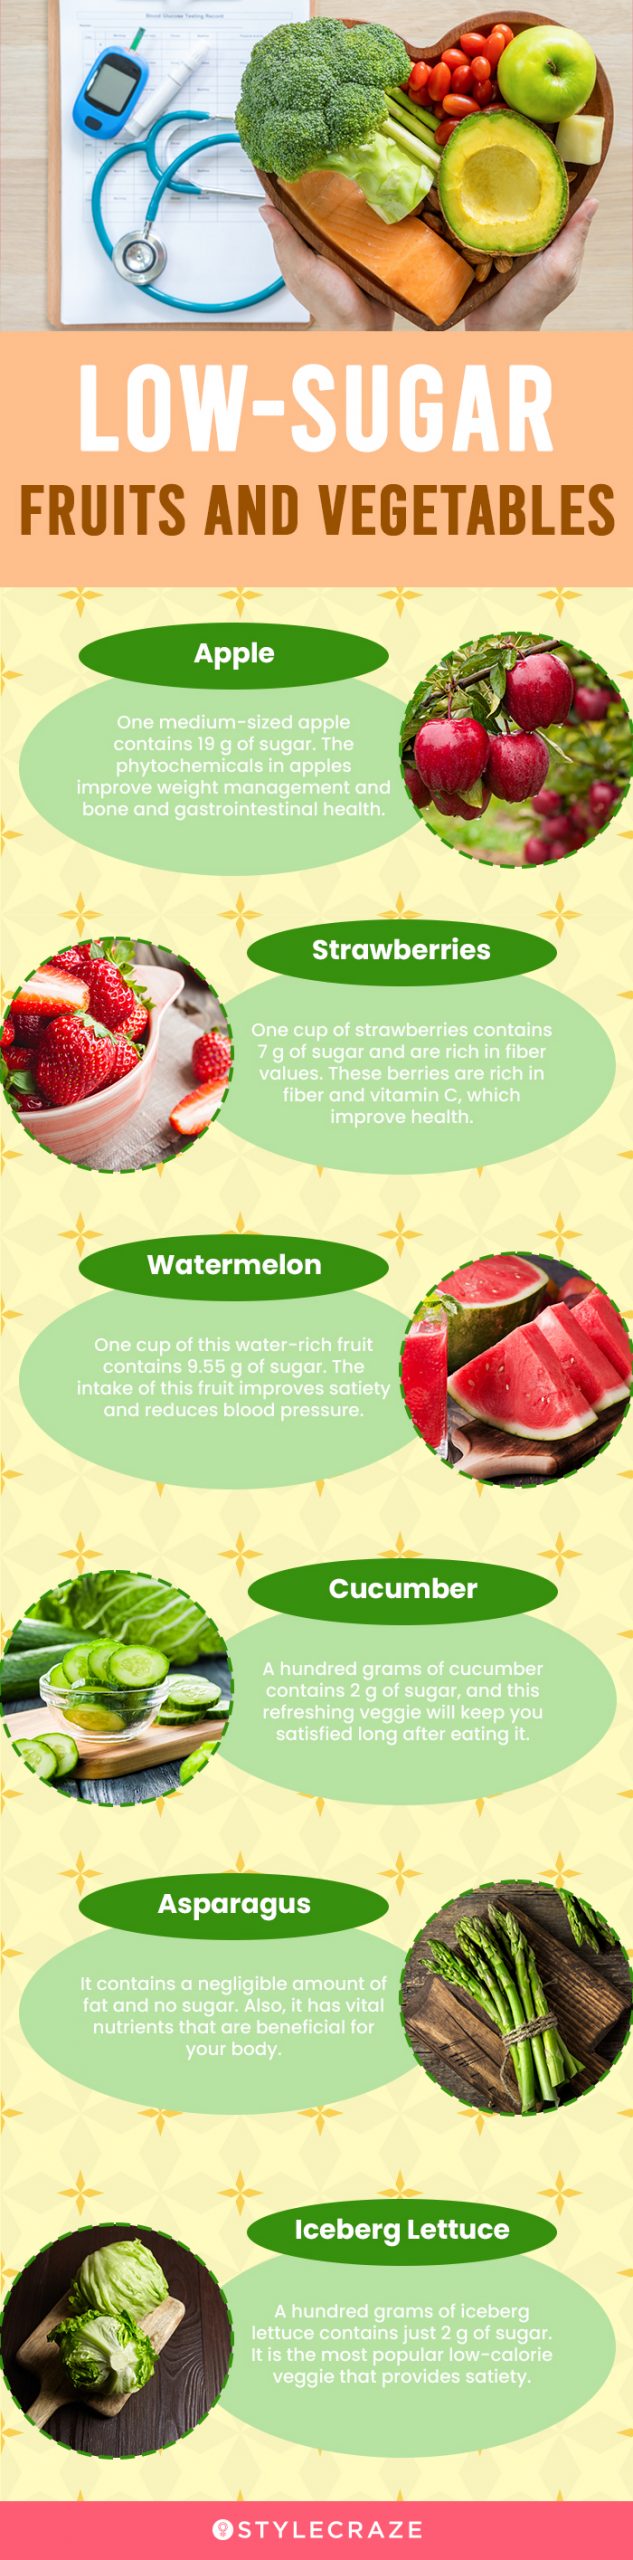 low sugar fruits and vegetables [infographic]